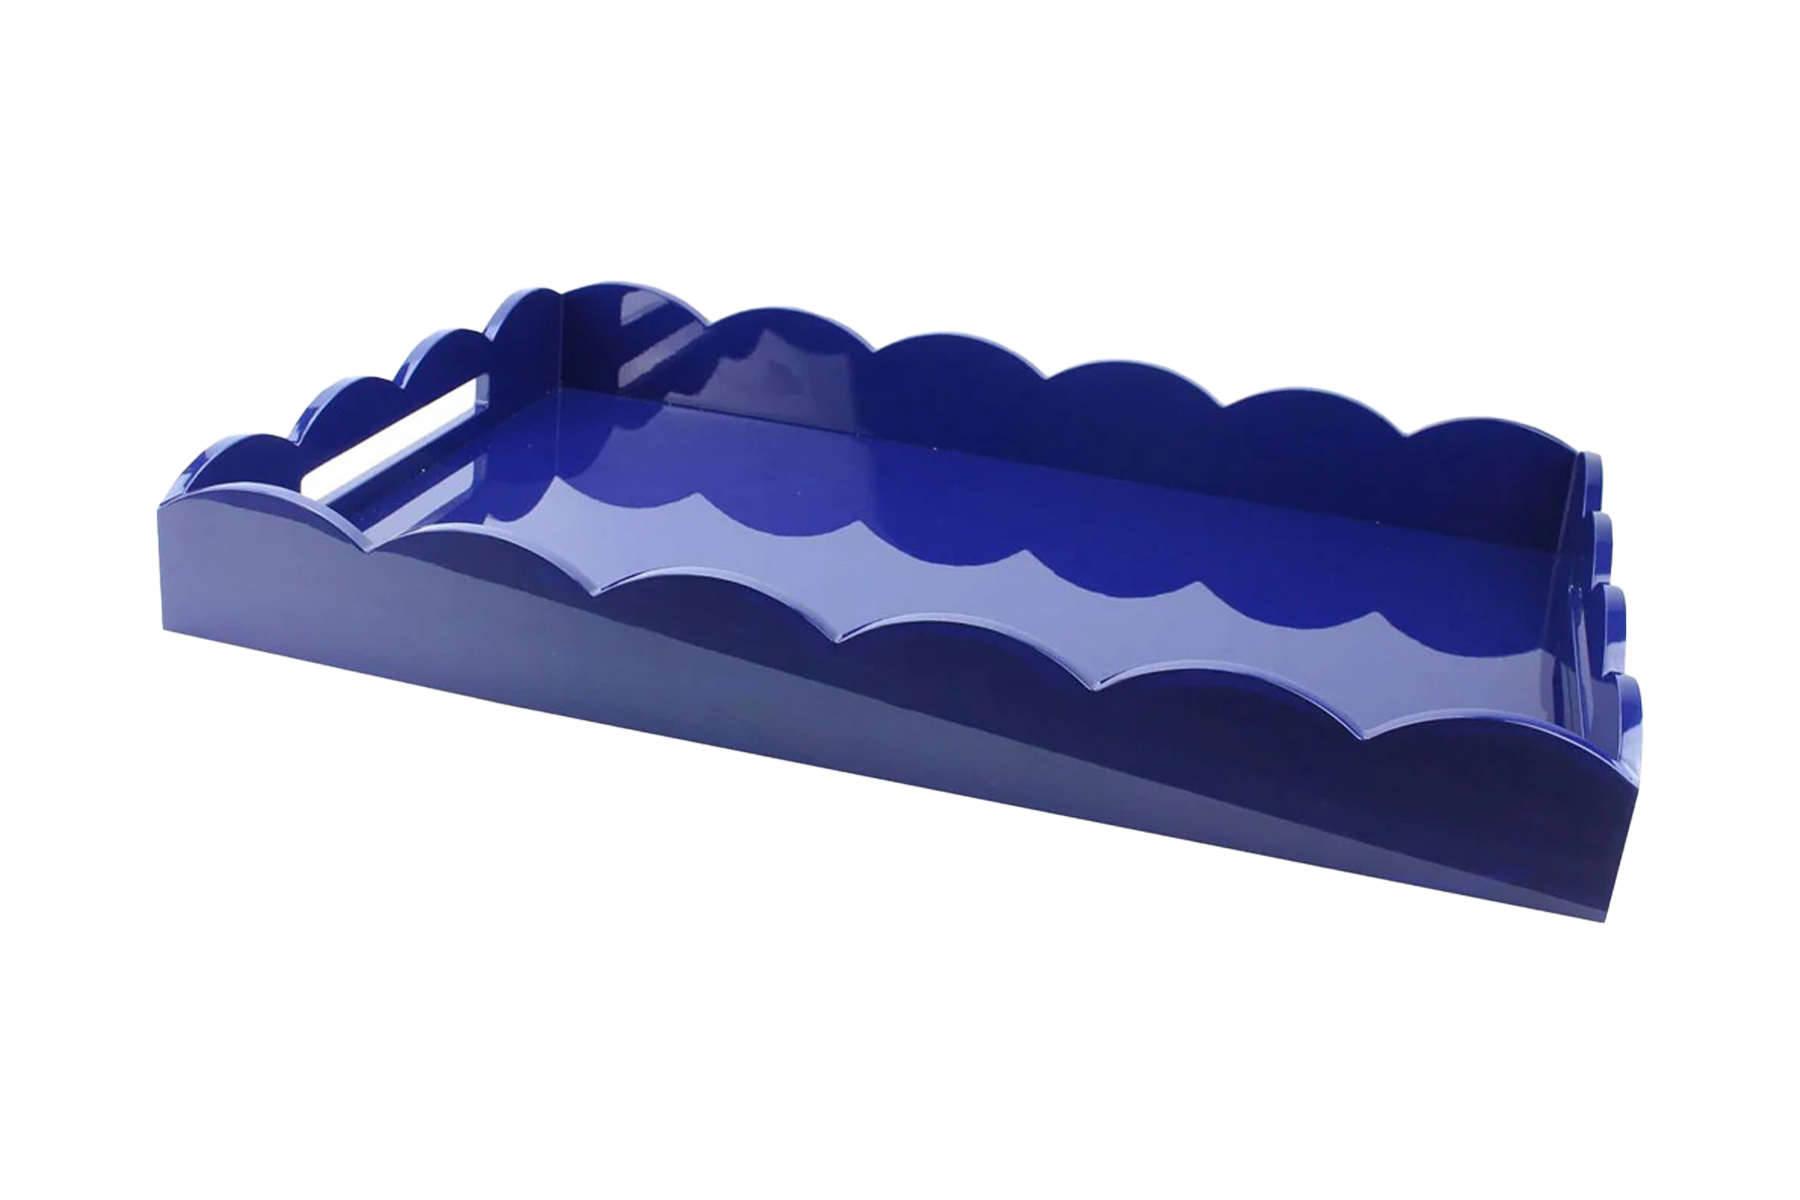 Addison Ross Lacquer Tray from Stanley Korshak